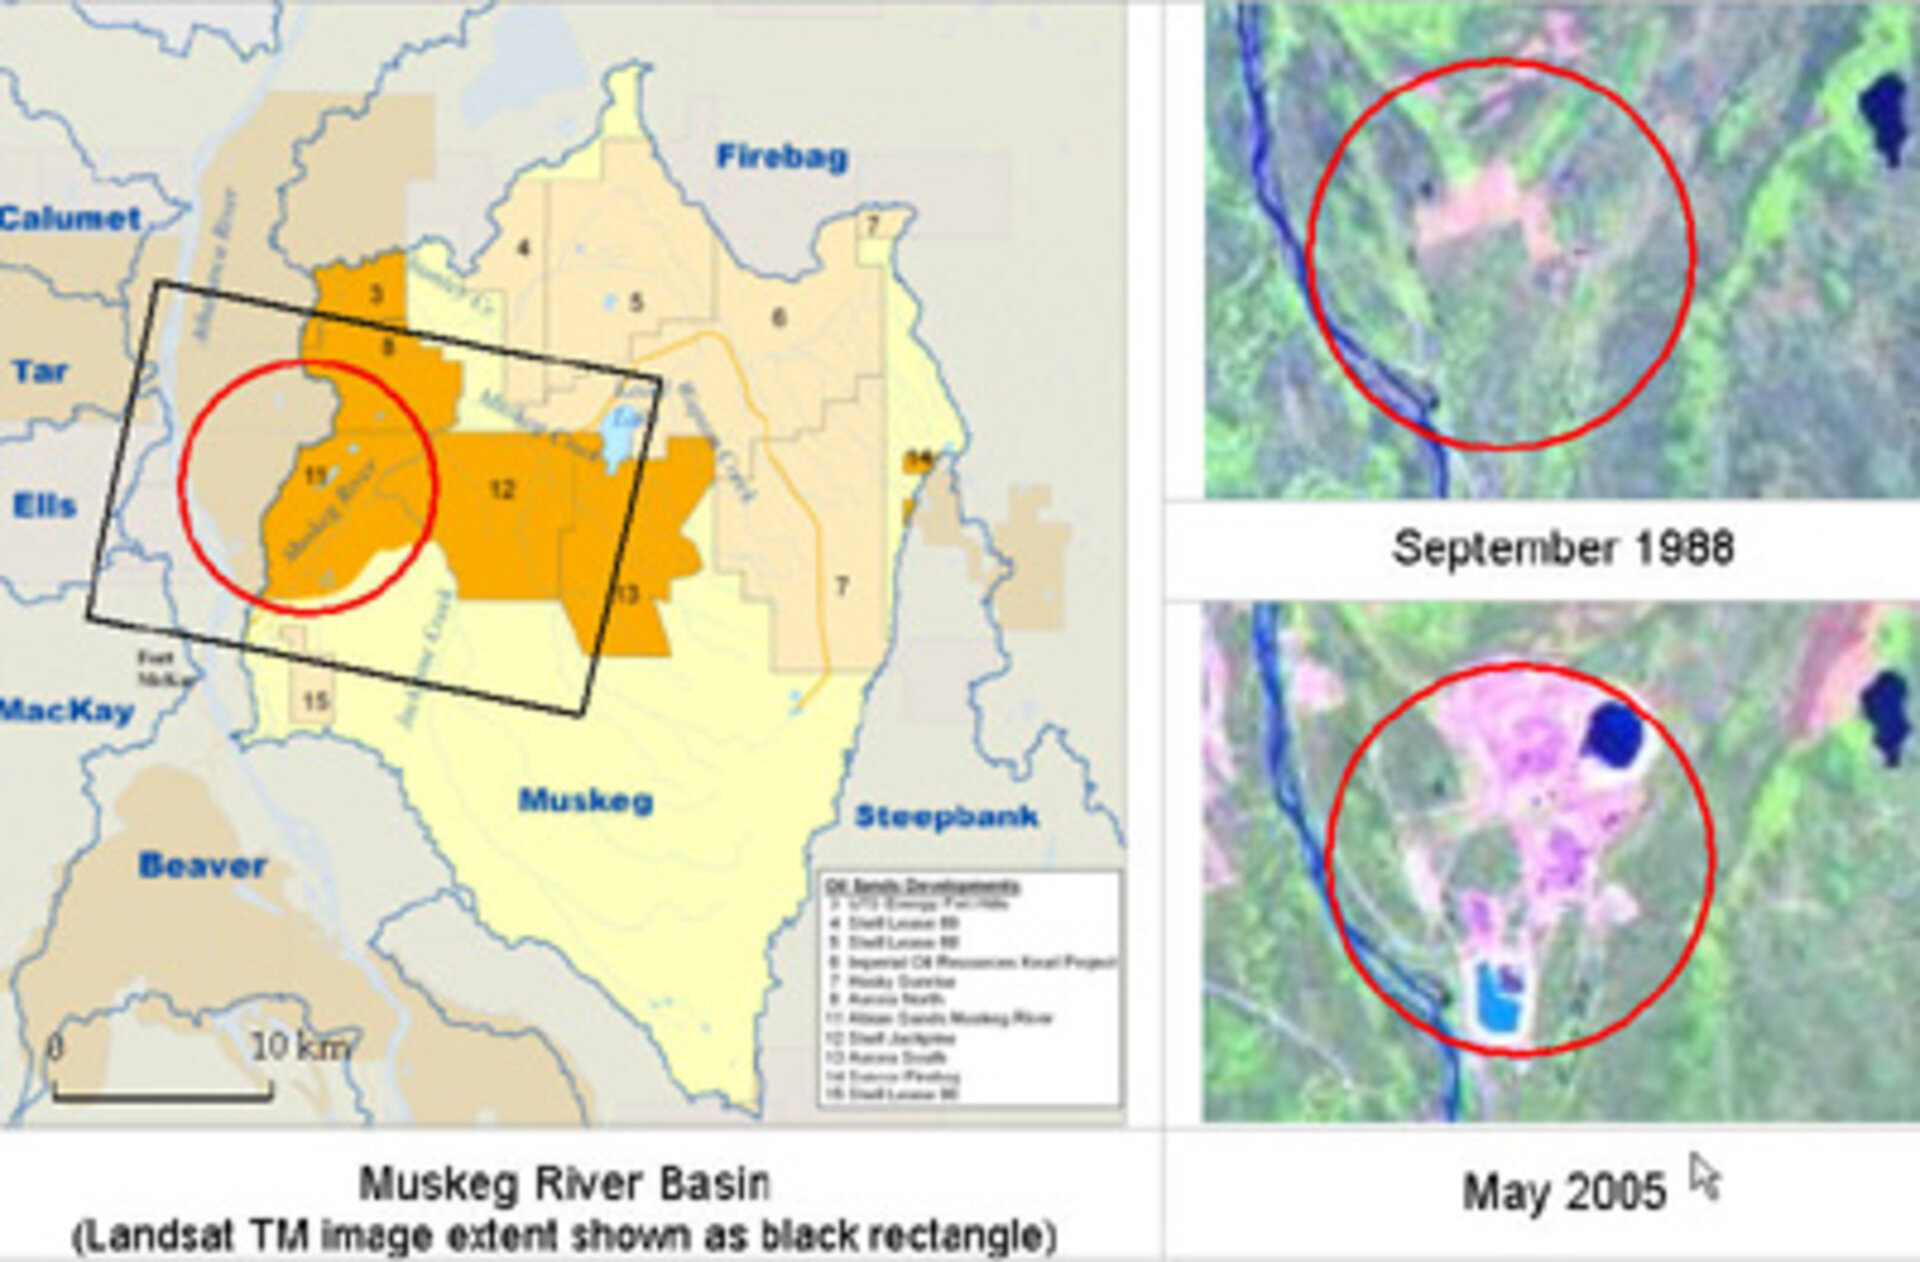 Satellite observations of the Muskeg River Basin